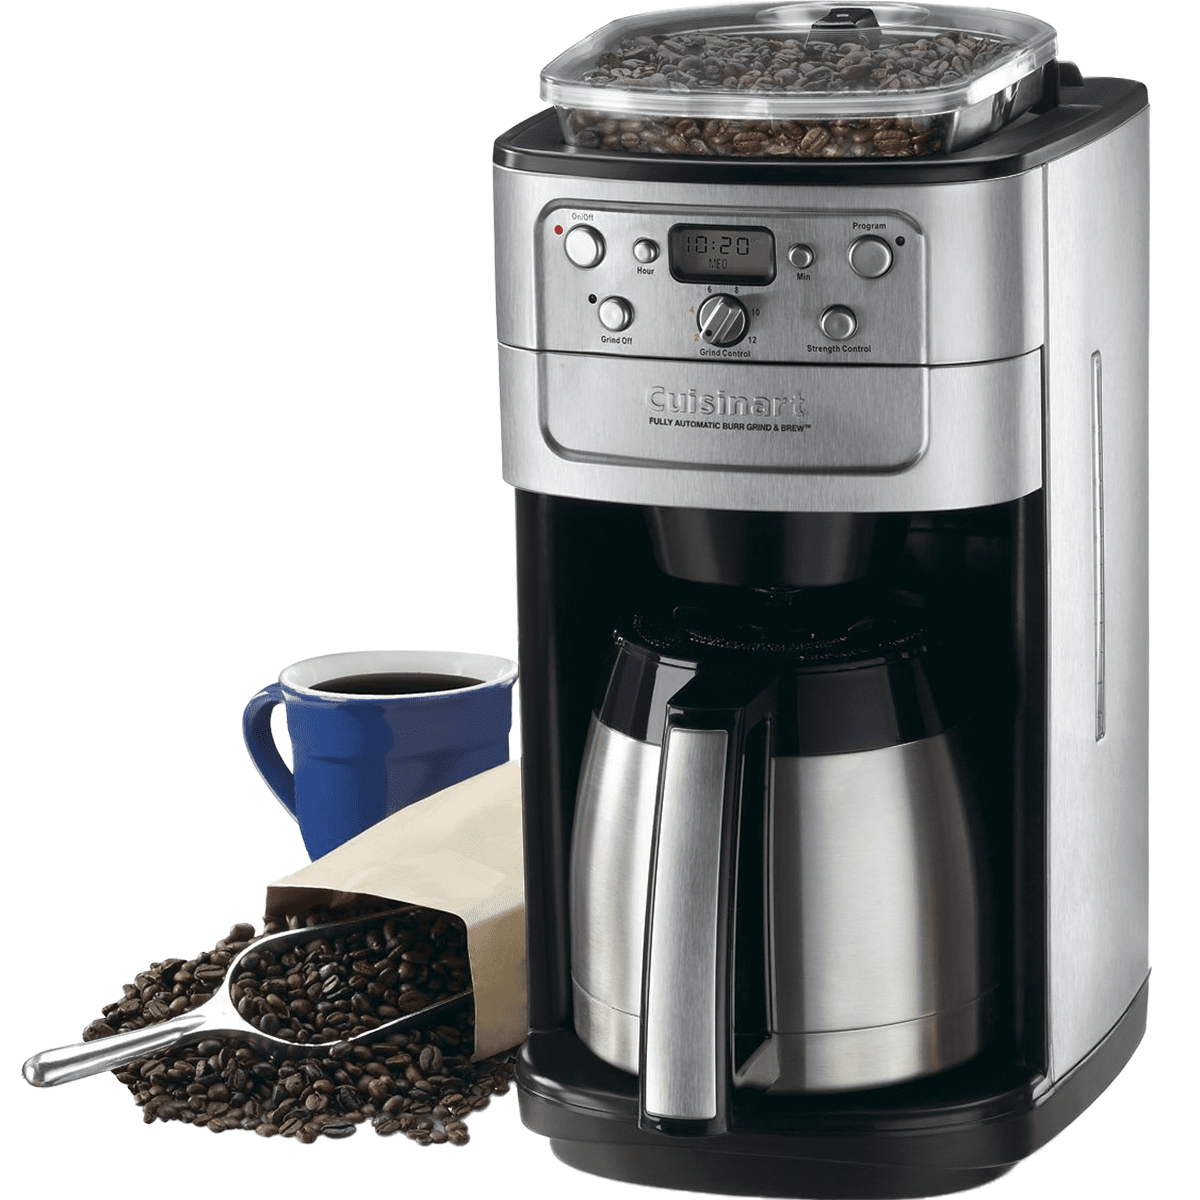 Cuisinart Burr Grind & Brew Thermal 12 Cup Automatic Coffee Maker (dgb-900bc)